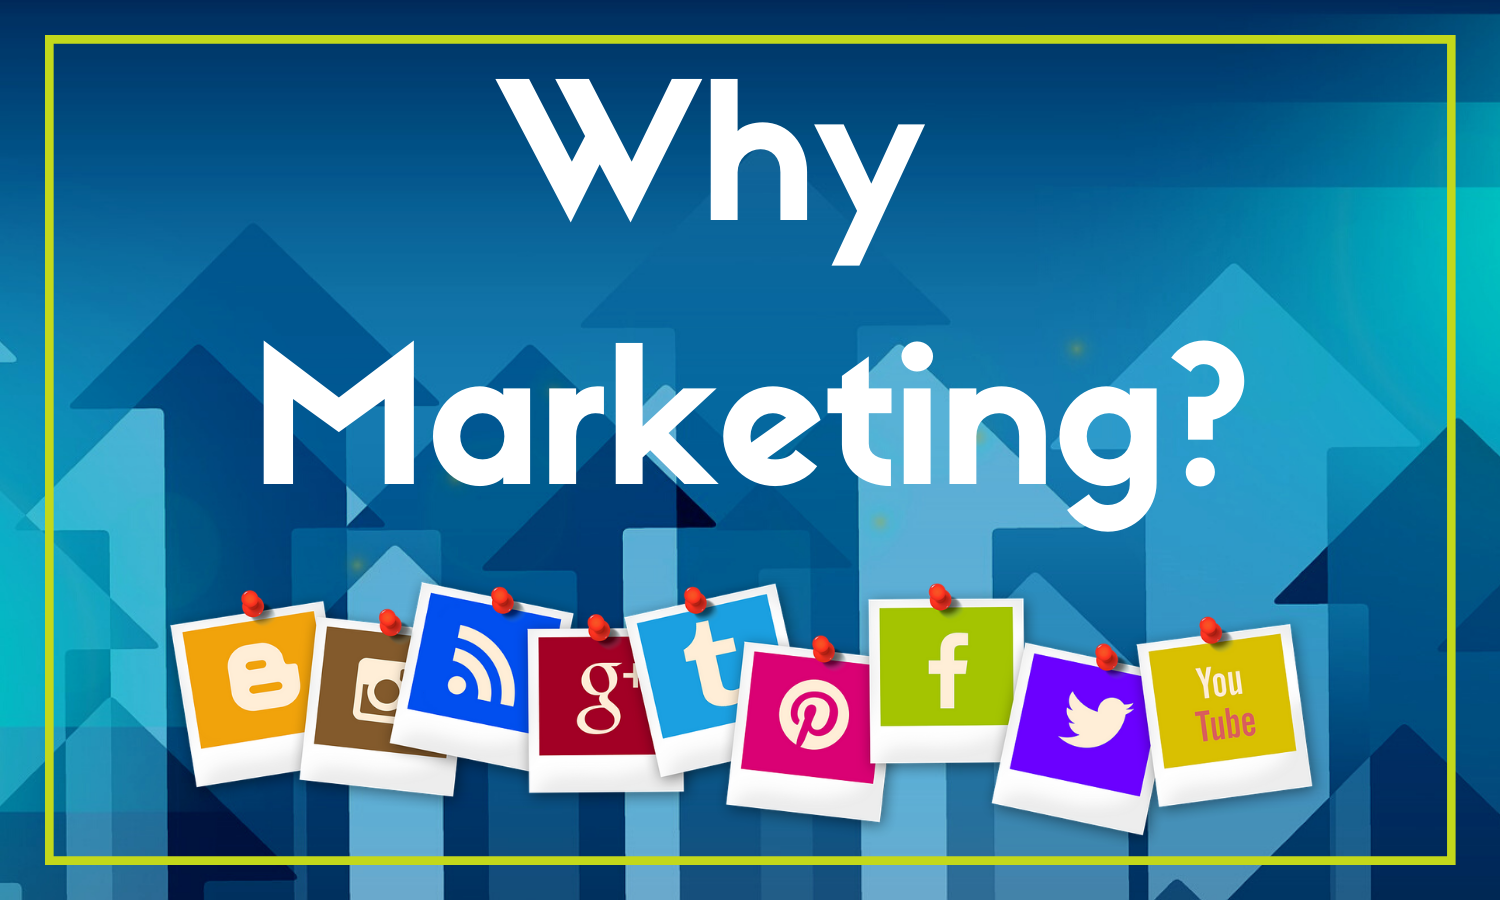 why is marketing important for business?